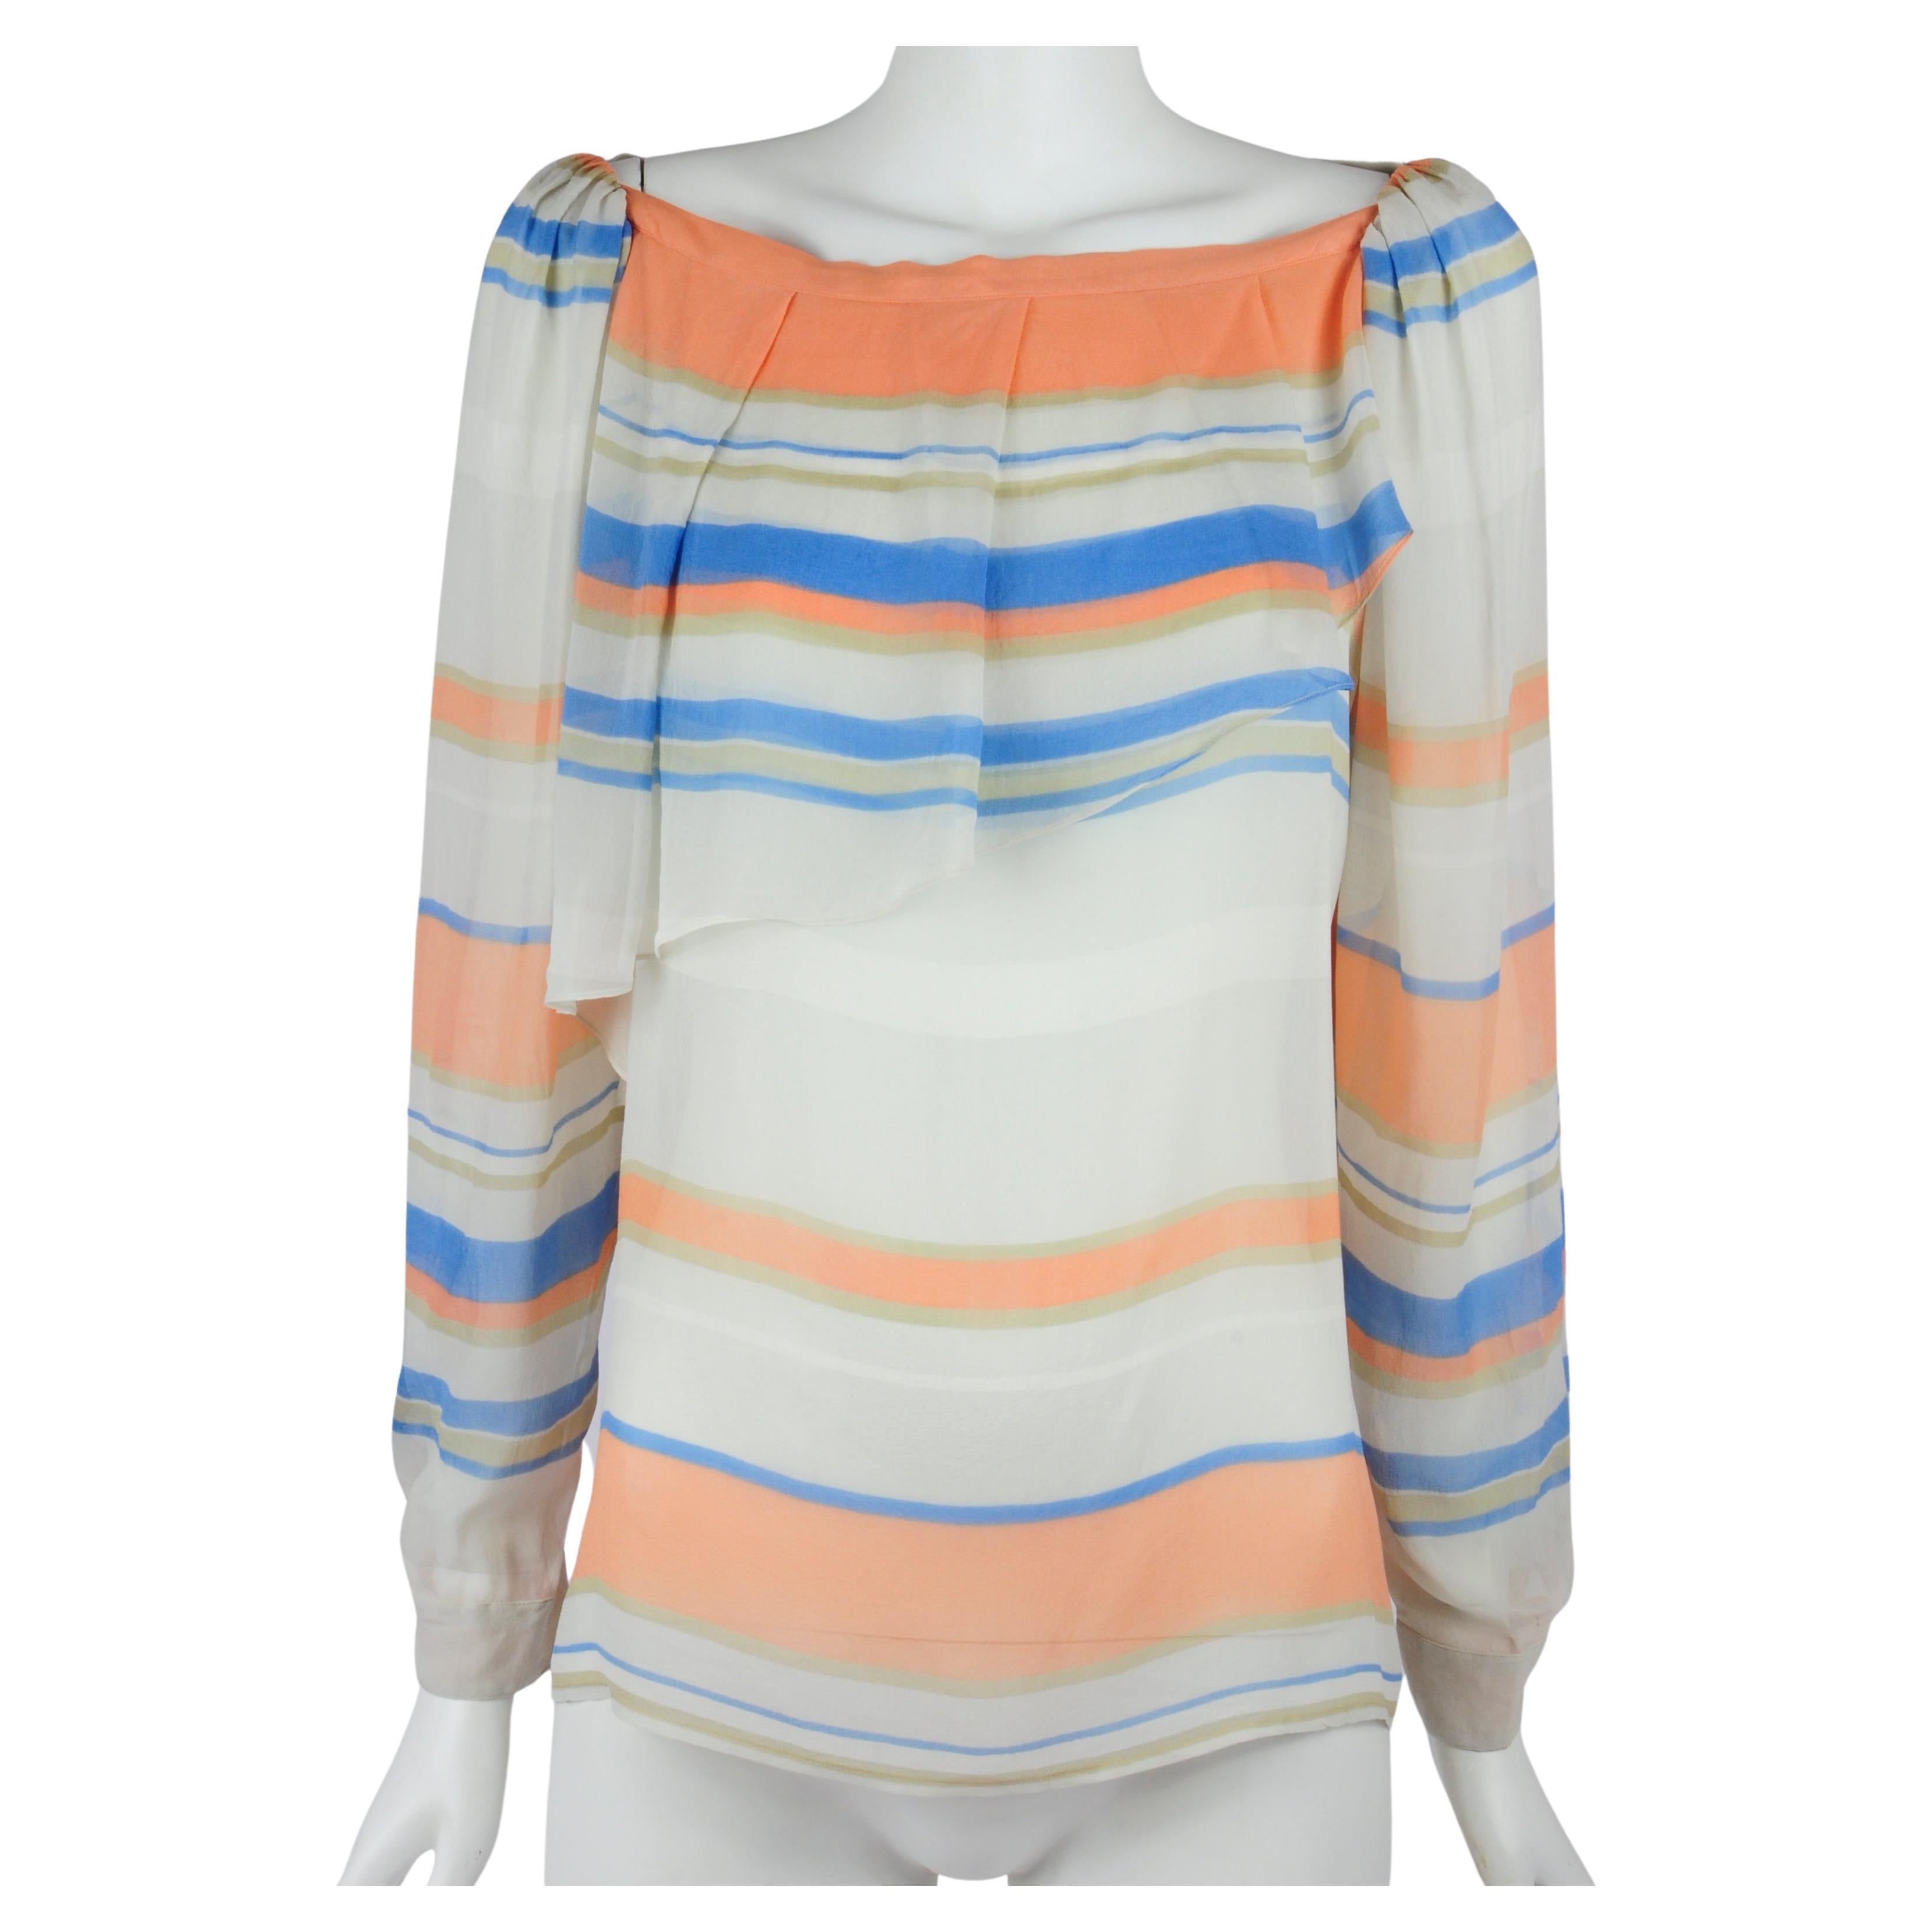 Christian Dior Silk Striped Blouse with Volant Detail by Marc Bohan 1970s For Sale